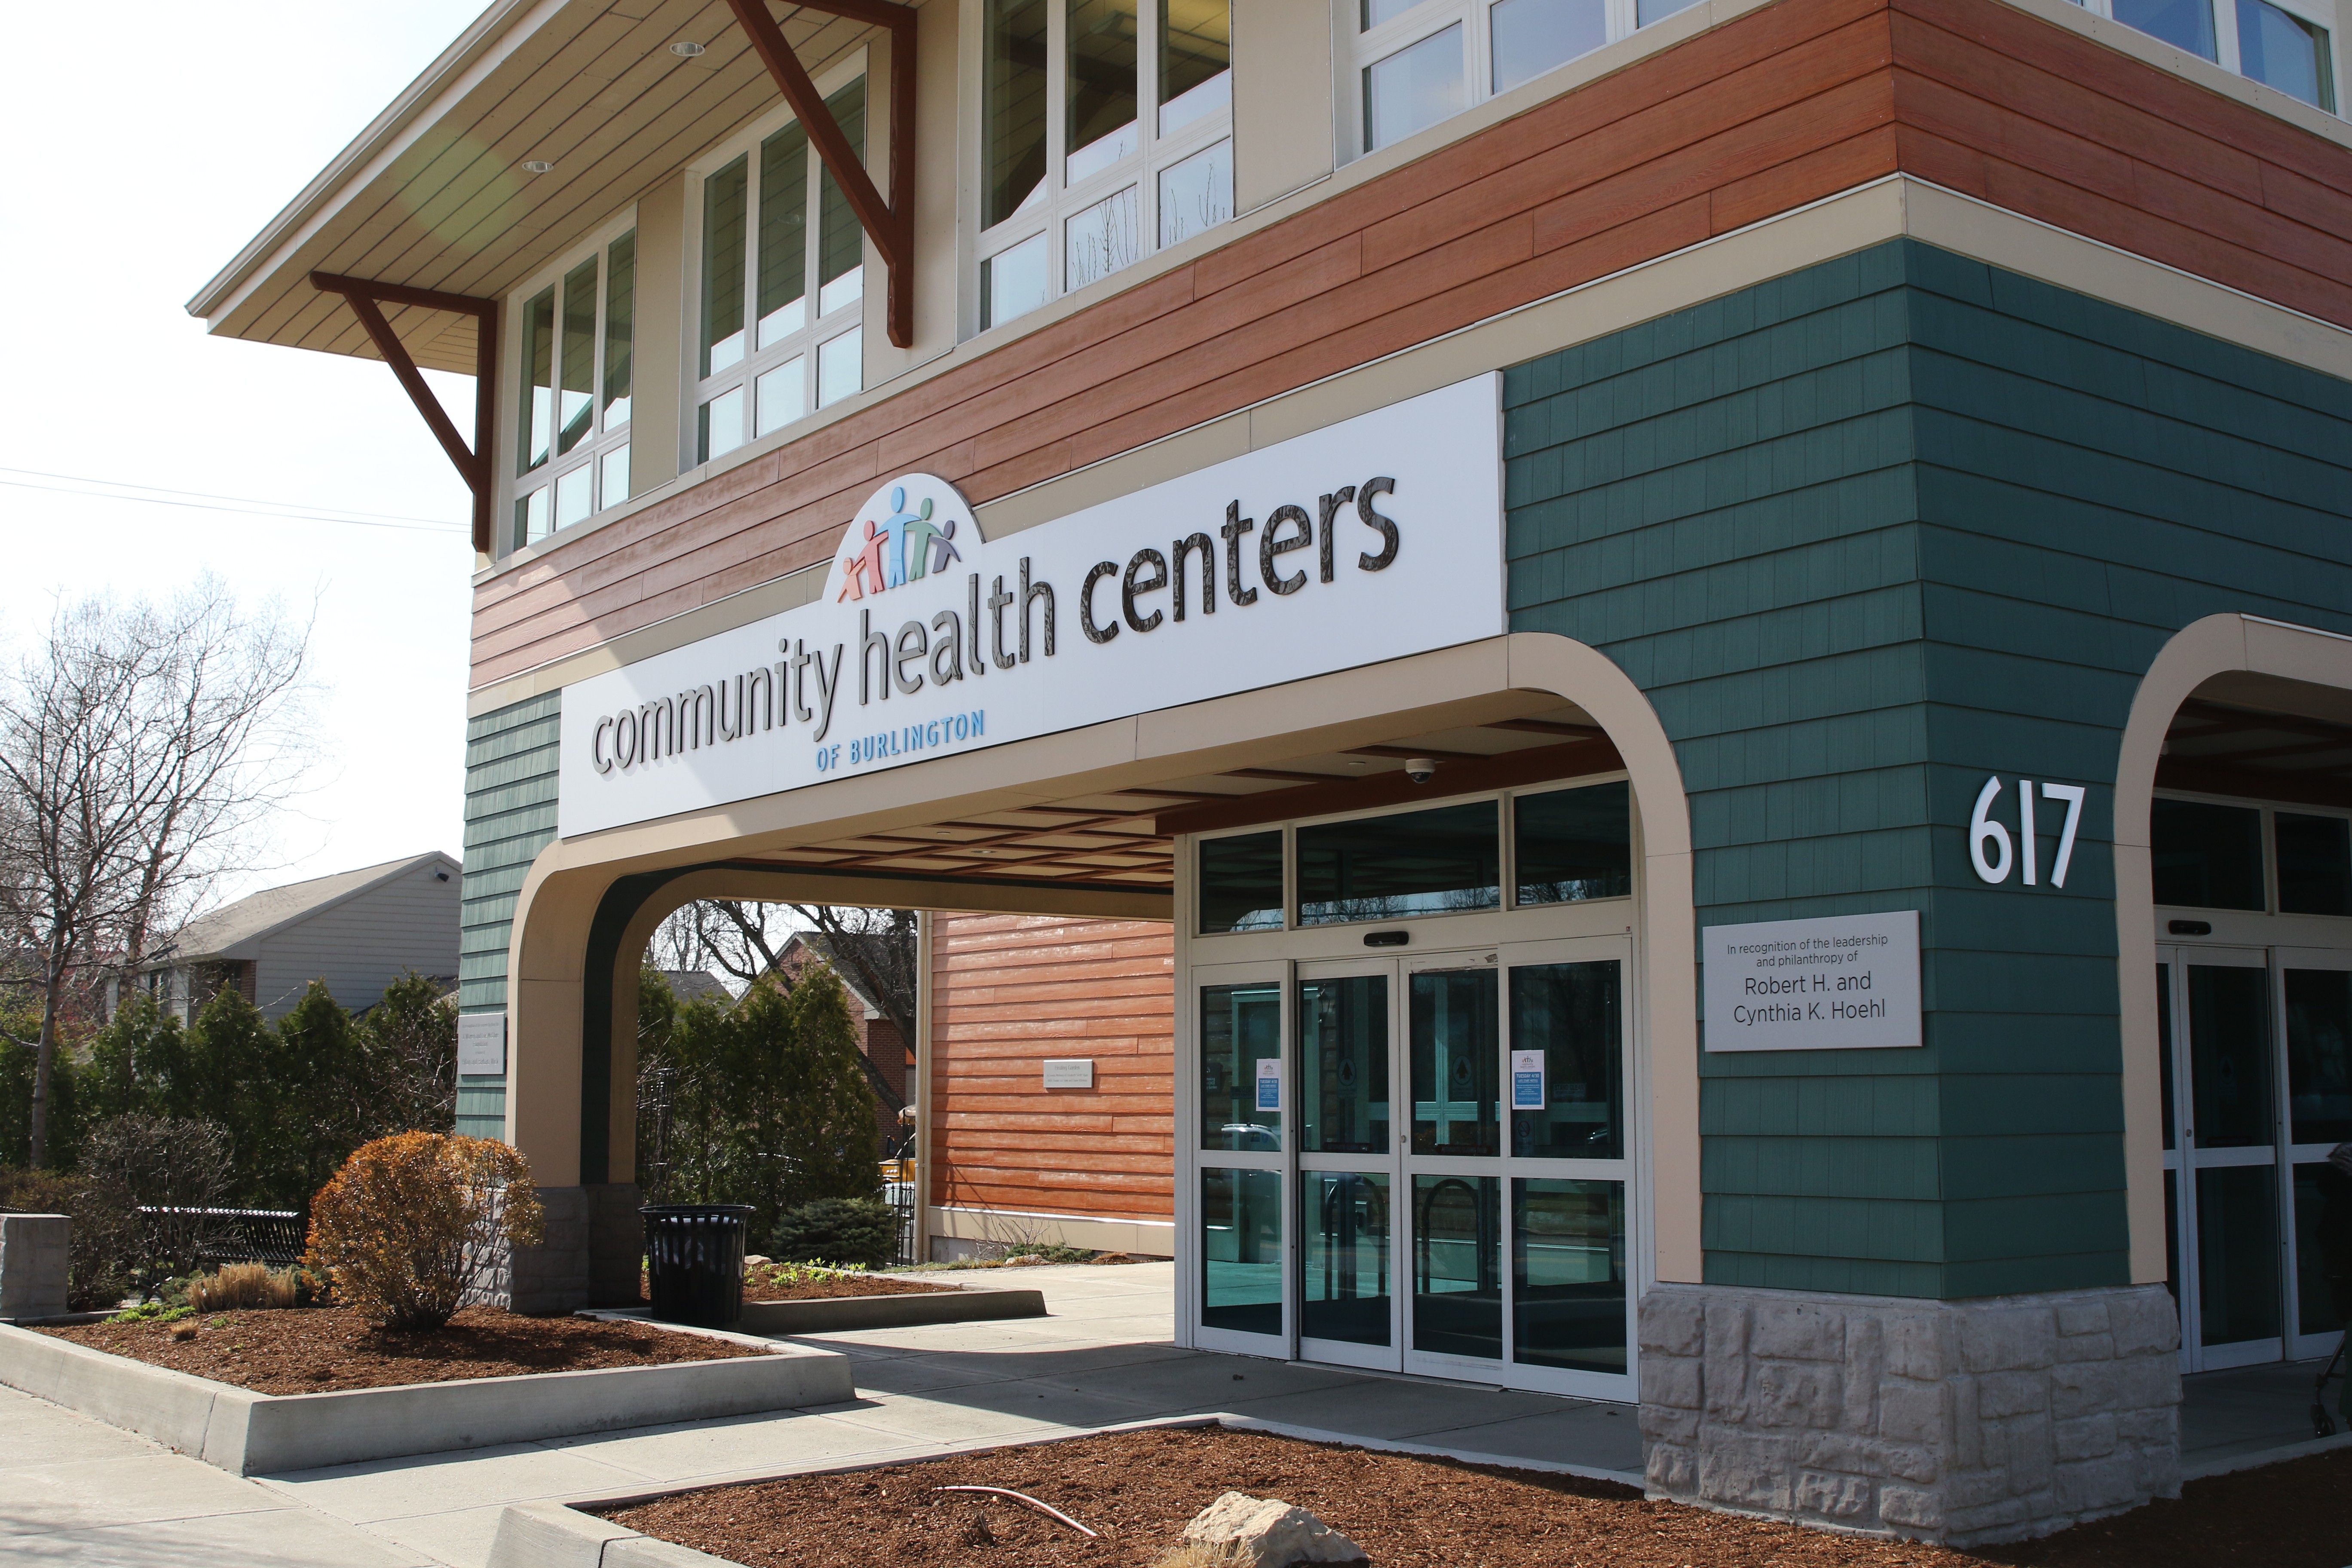 Community Health Centers Of Burlington Unionization Effort Ends With Mixed ...